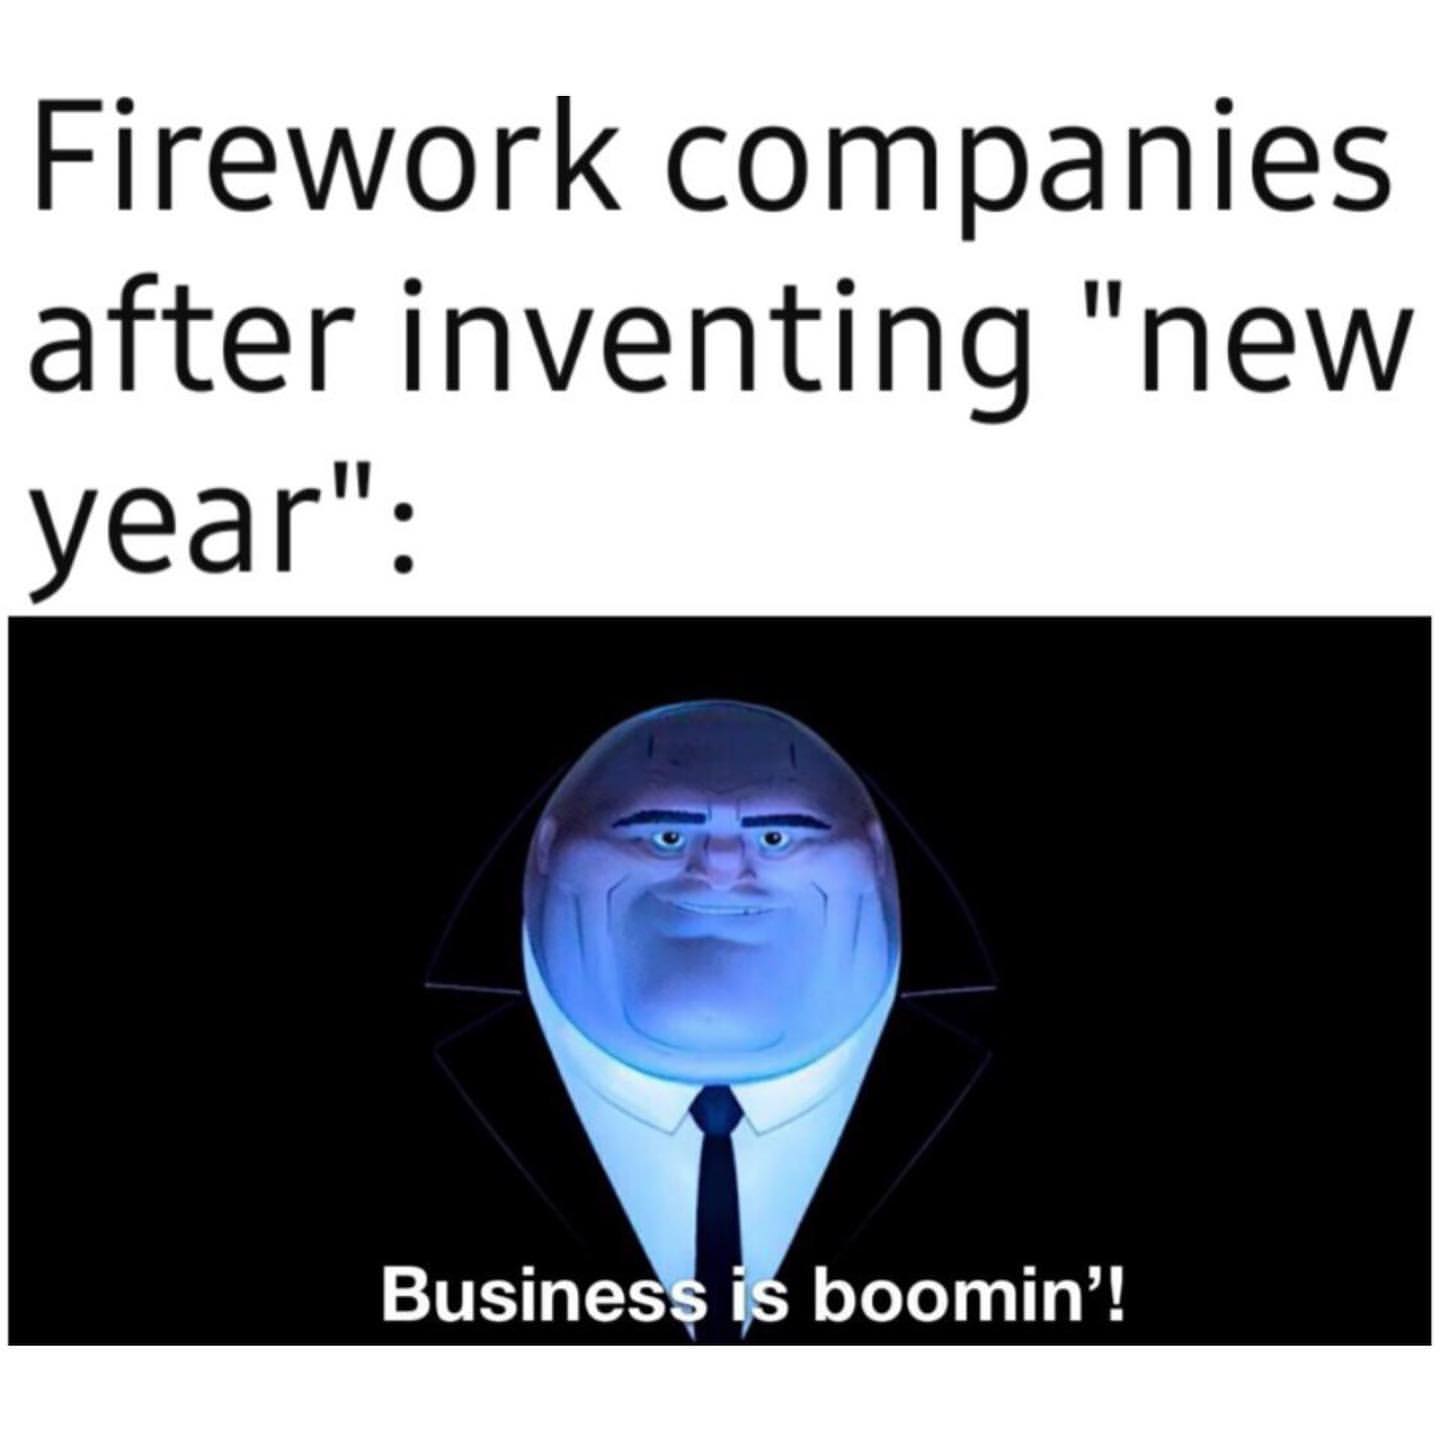 Firework companies after inventing "new year": Business is boomin!